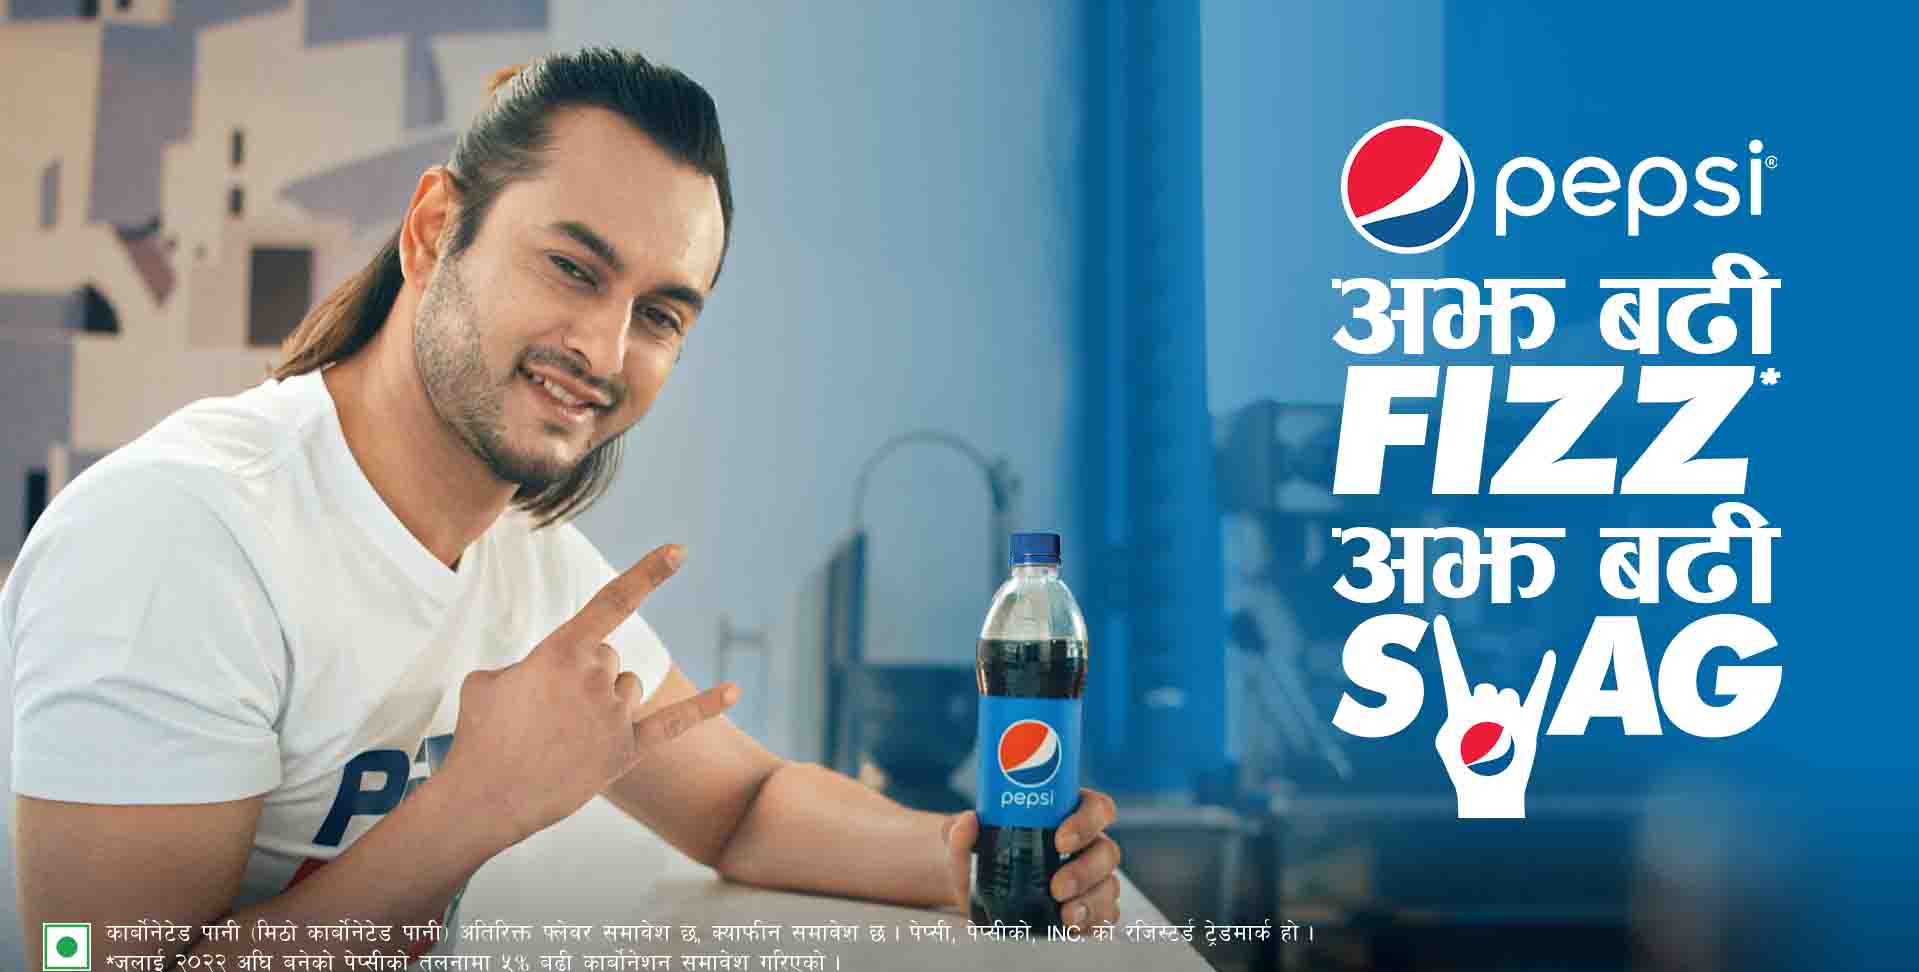 Pepsi’s new campaign to encourage youngsters